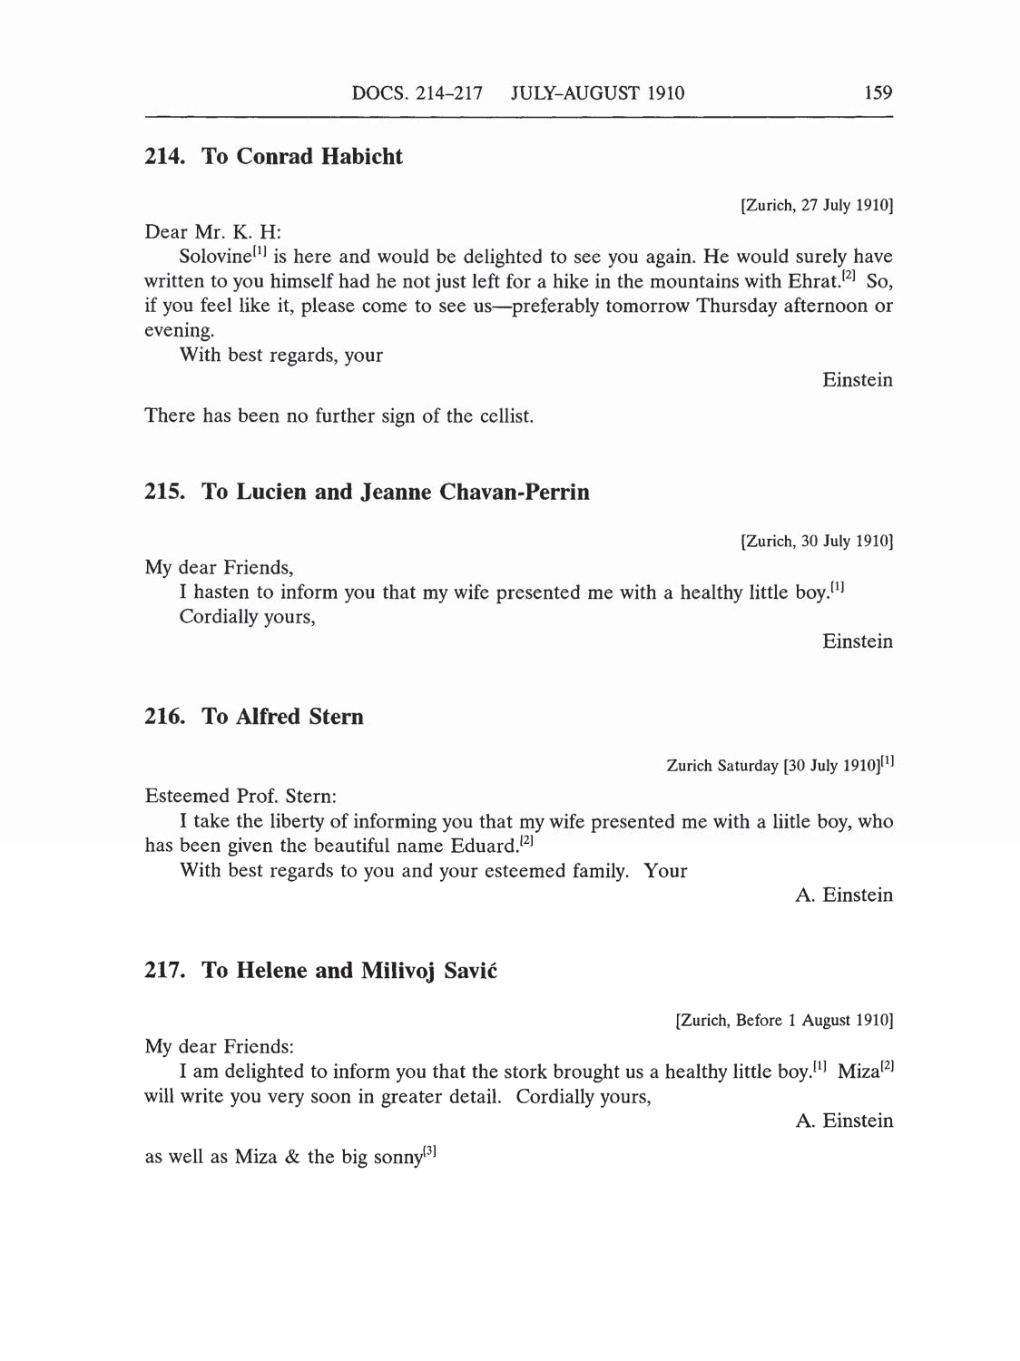 Volume 5: The Swiss Years: Correspondence, 1902-1914 (English translation supplement) page 159